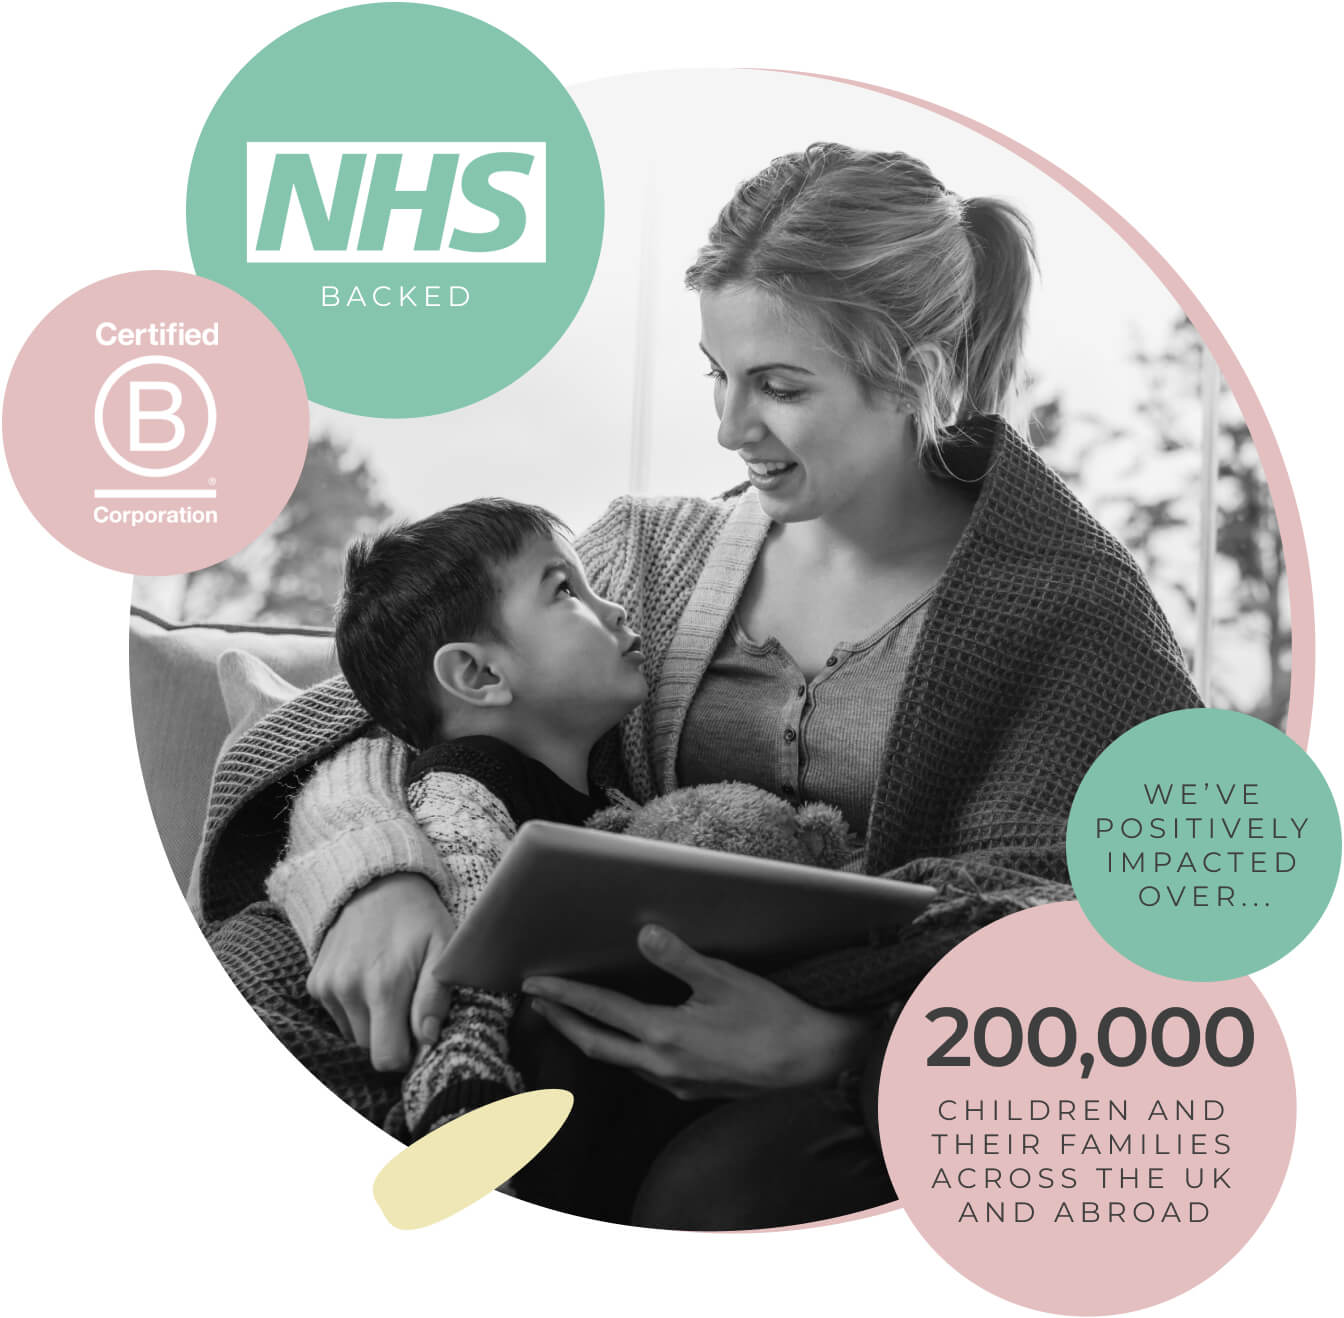 myHappymind for Families mental health and wellbeing program image with NHS backed and B Corp logos. Bubbles with text stating how myHappymind has positively affect over 200,000 children and Families across the UK and abroad.